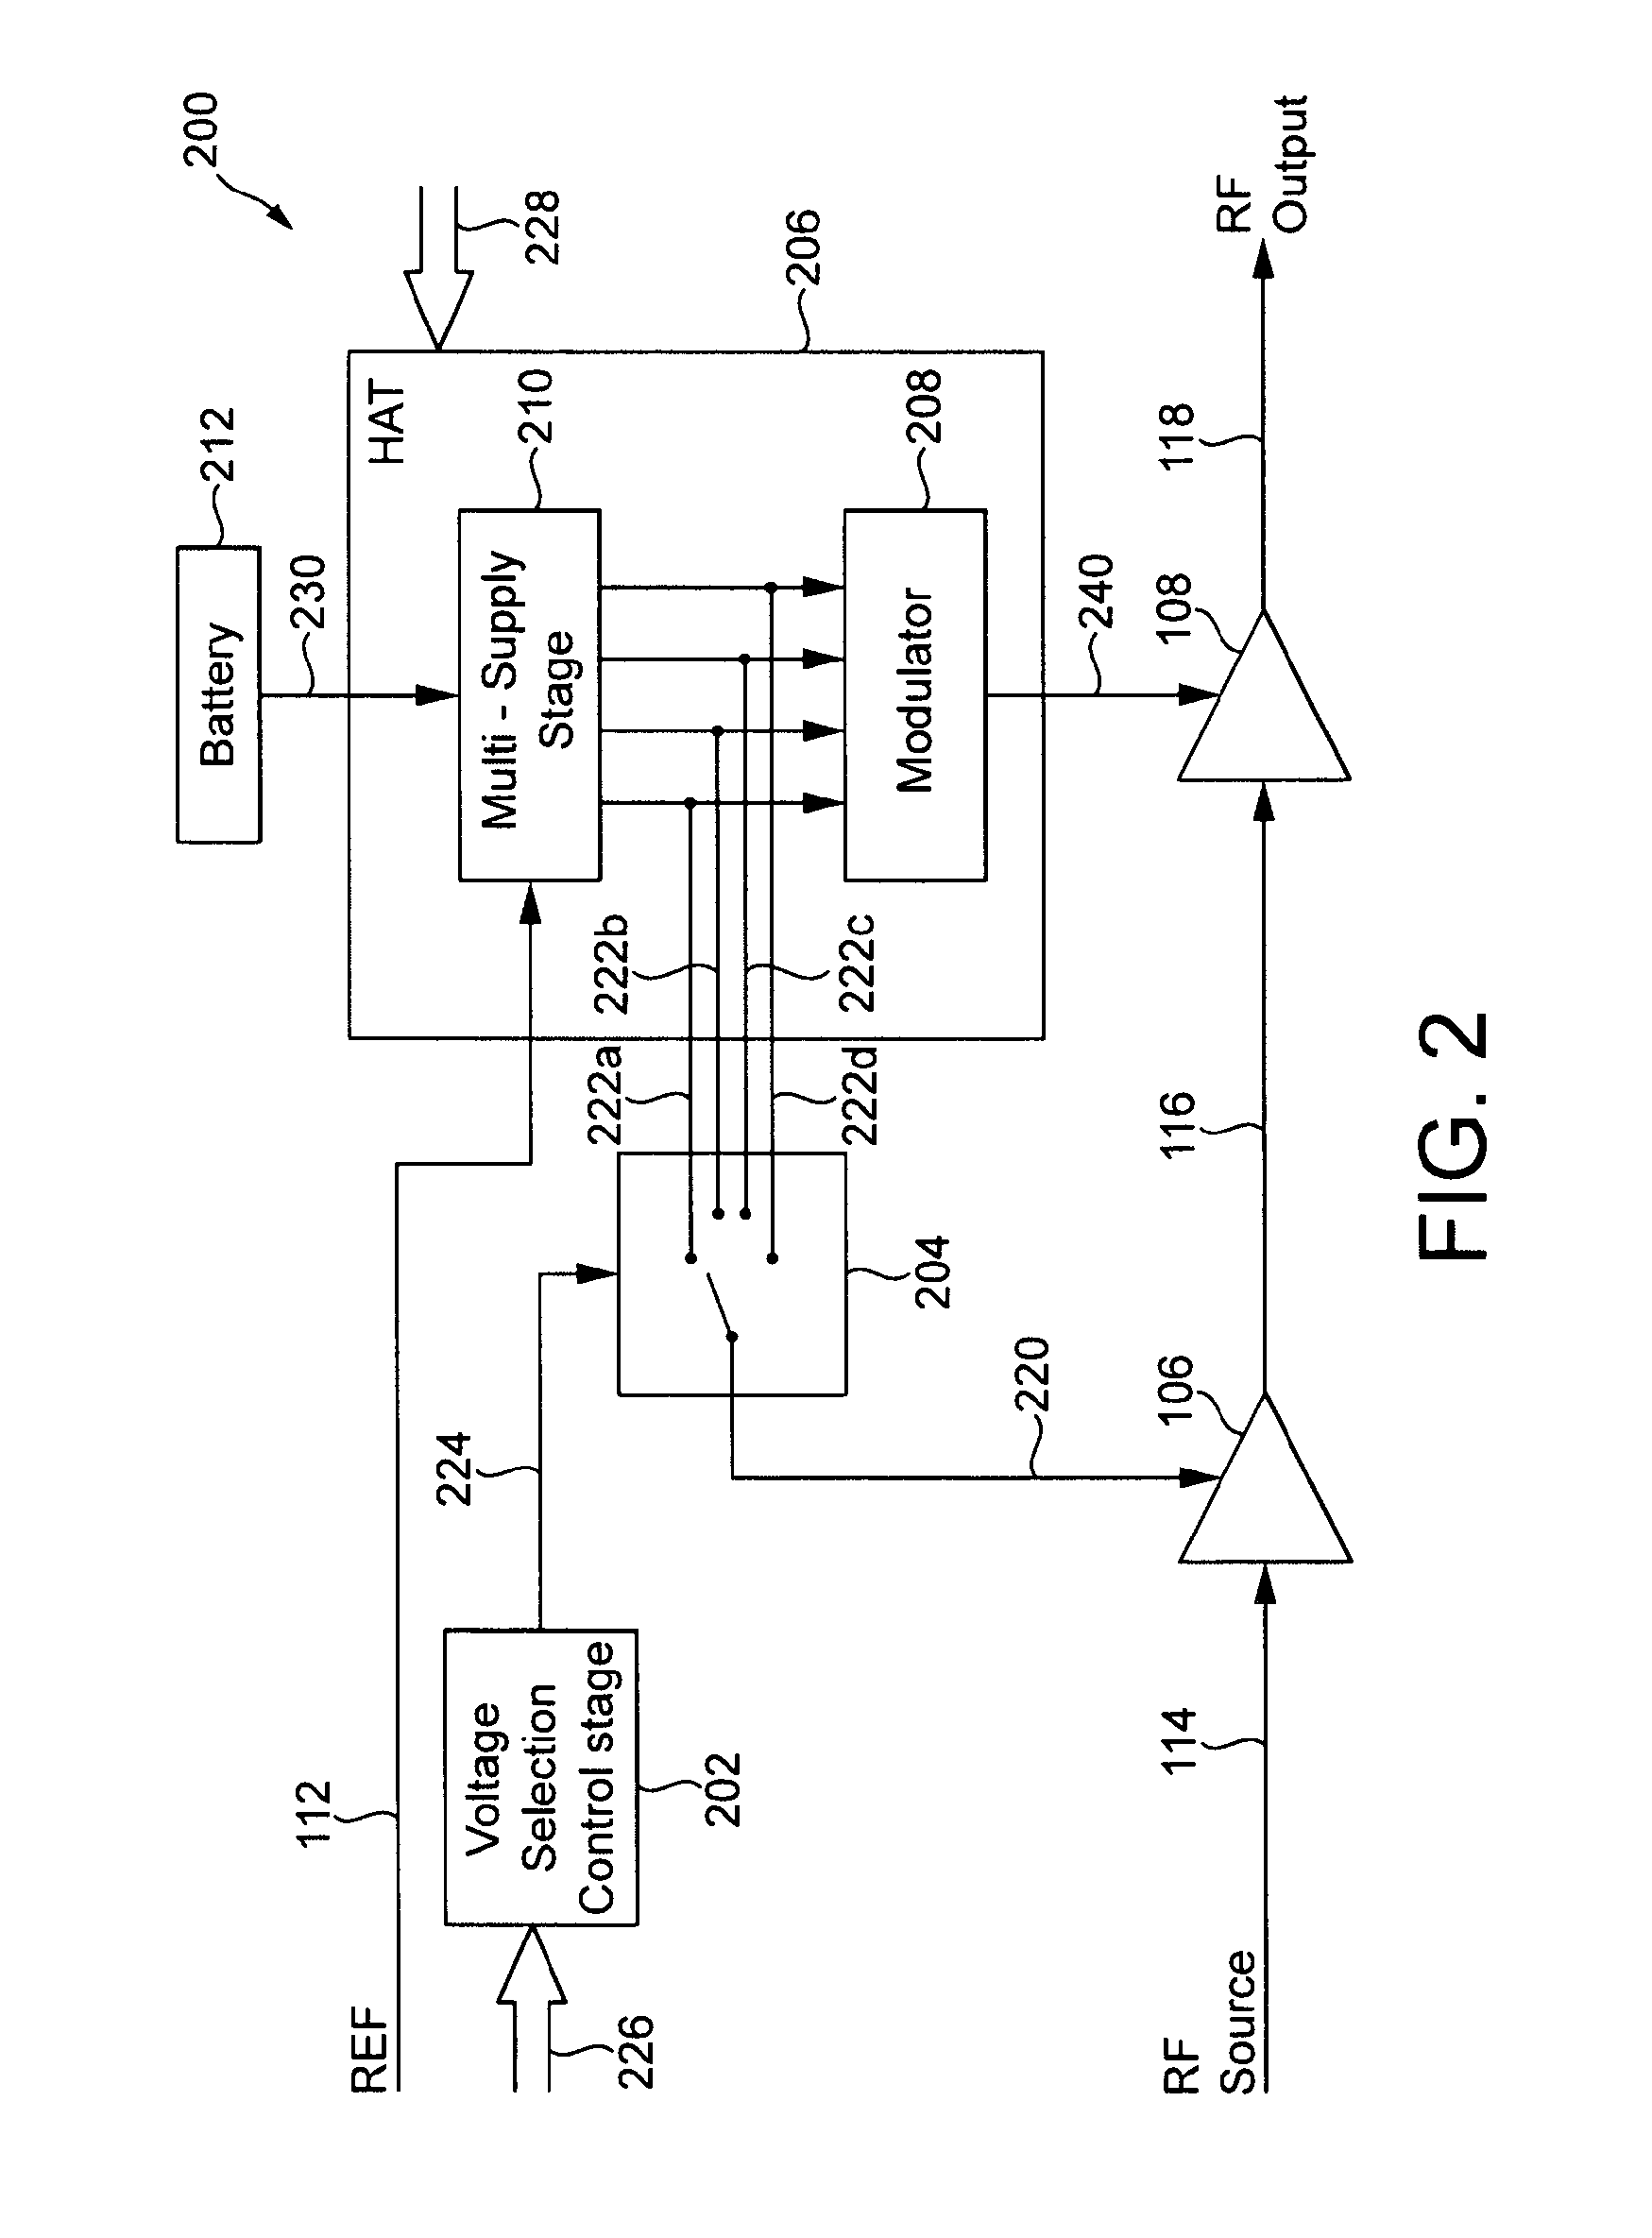 Power supply arrangement for multi-stage amplifier